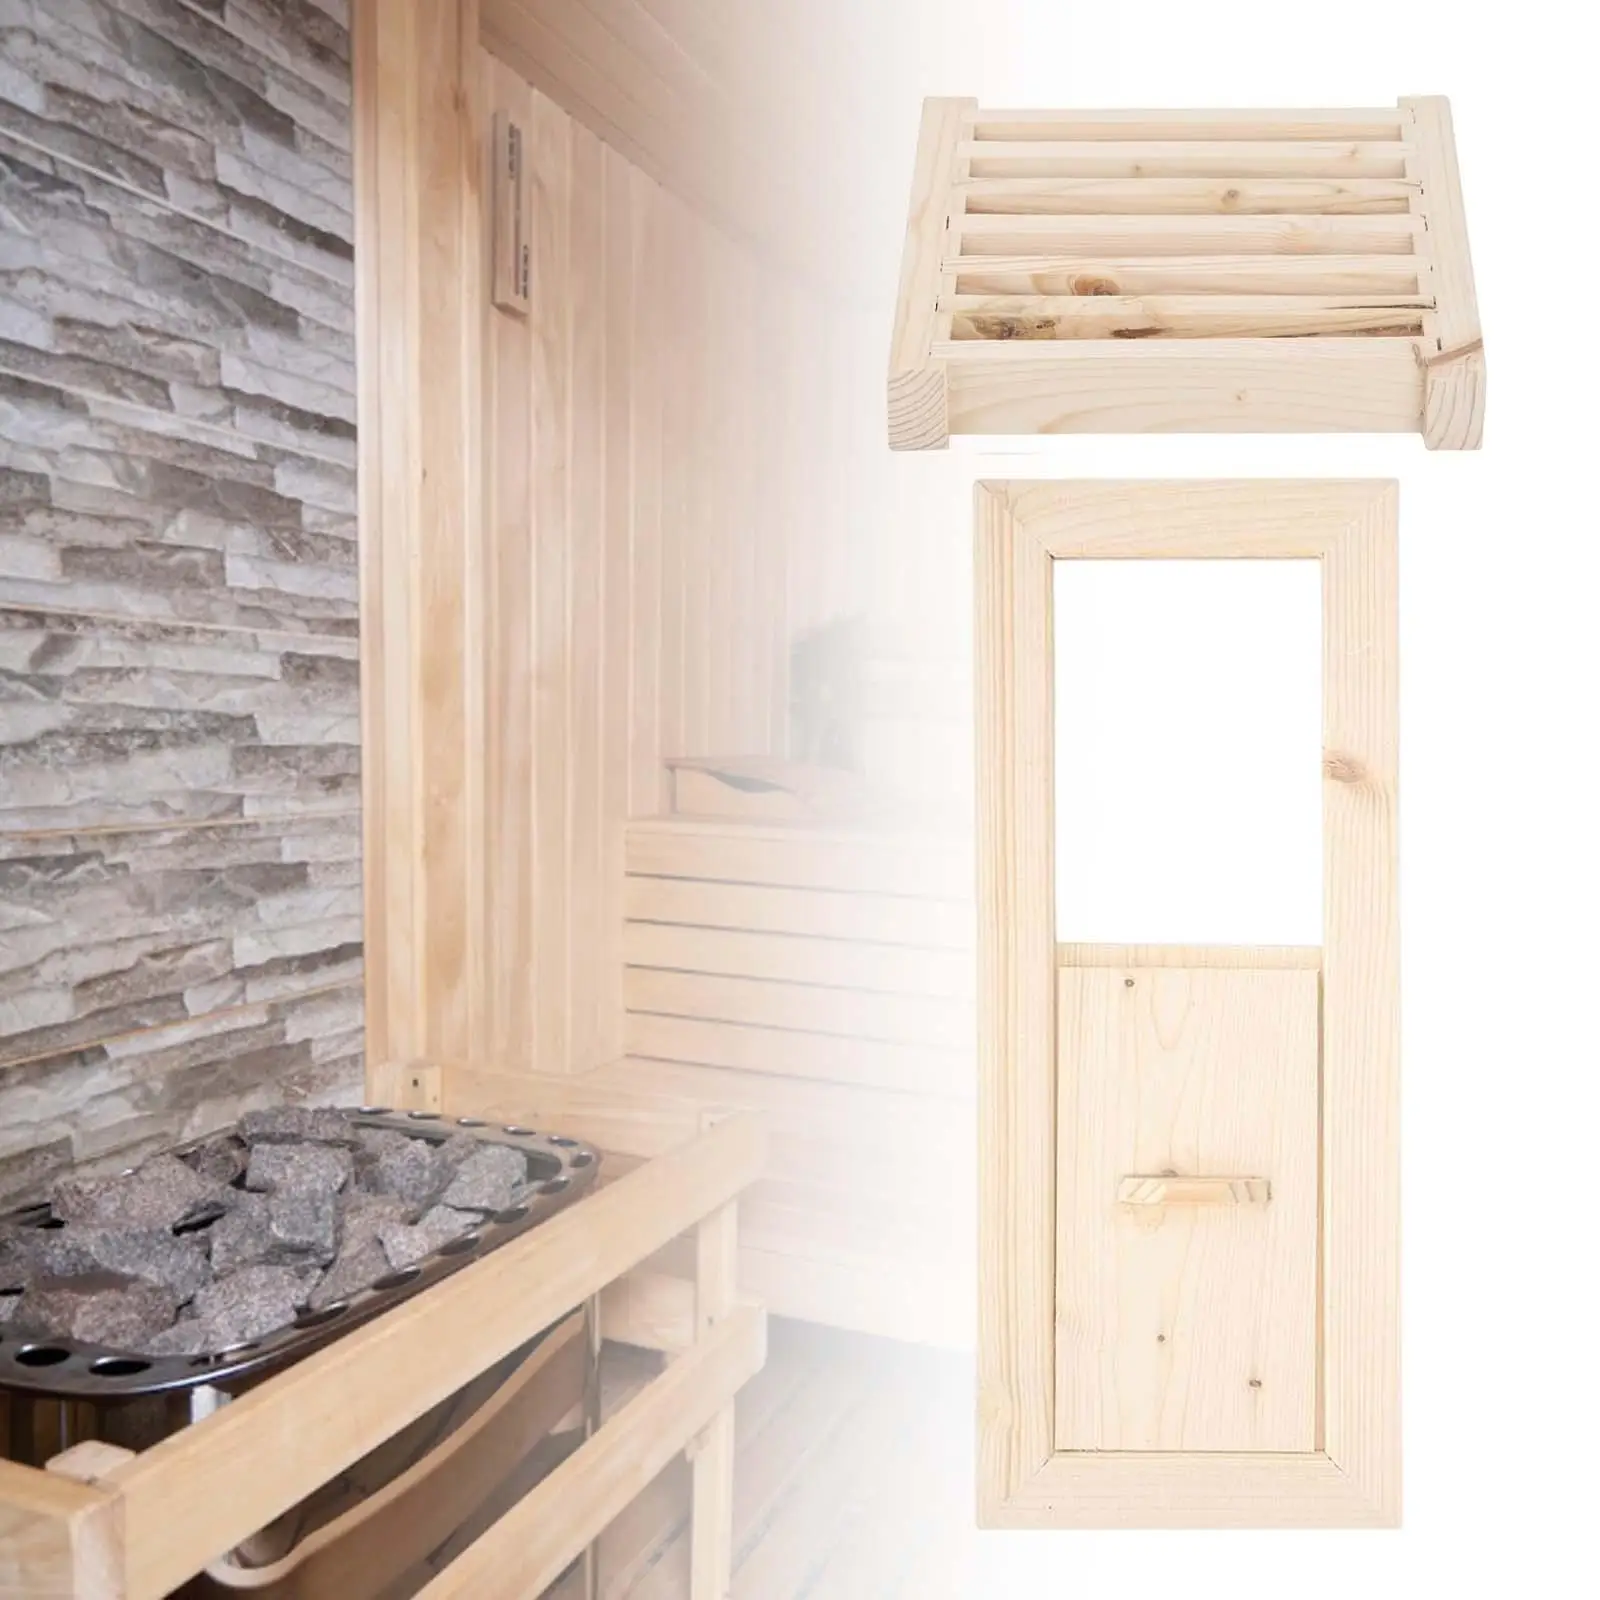 Sauna Room Air Vent Shutter Window Wooden Louvers Panel for Steam Room Russian Sauna Replacement